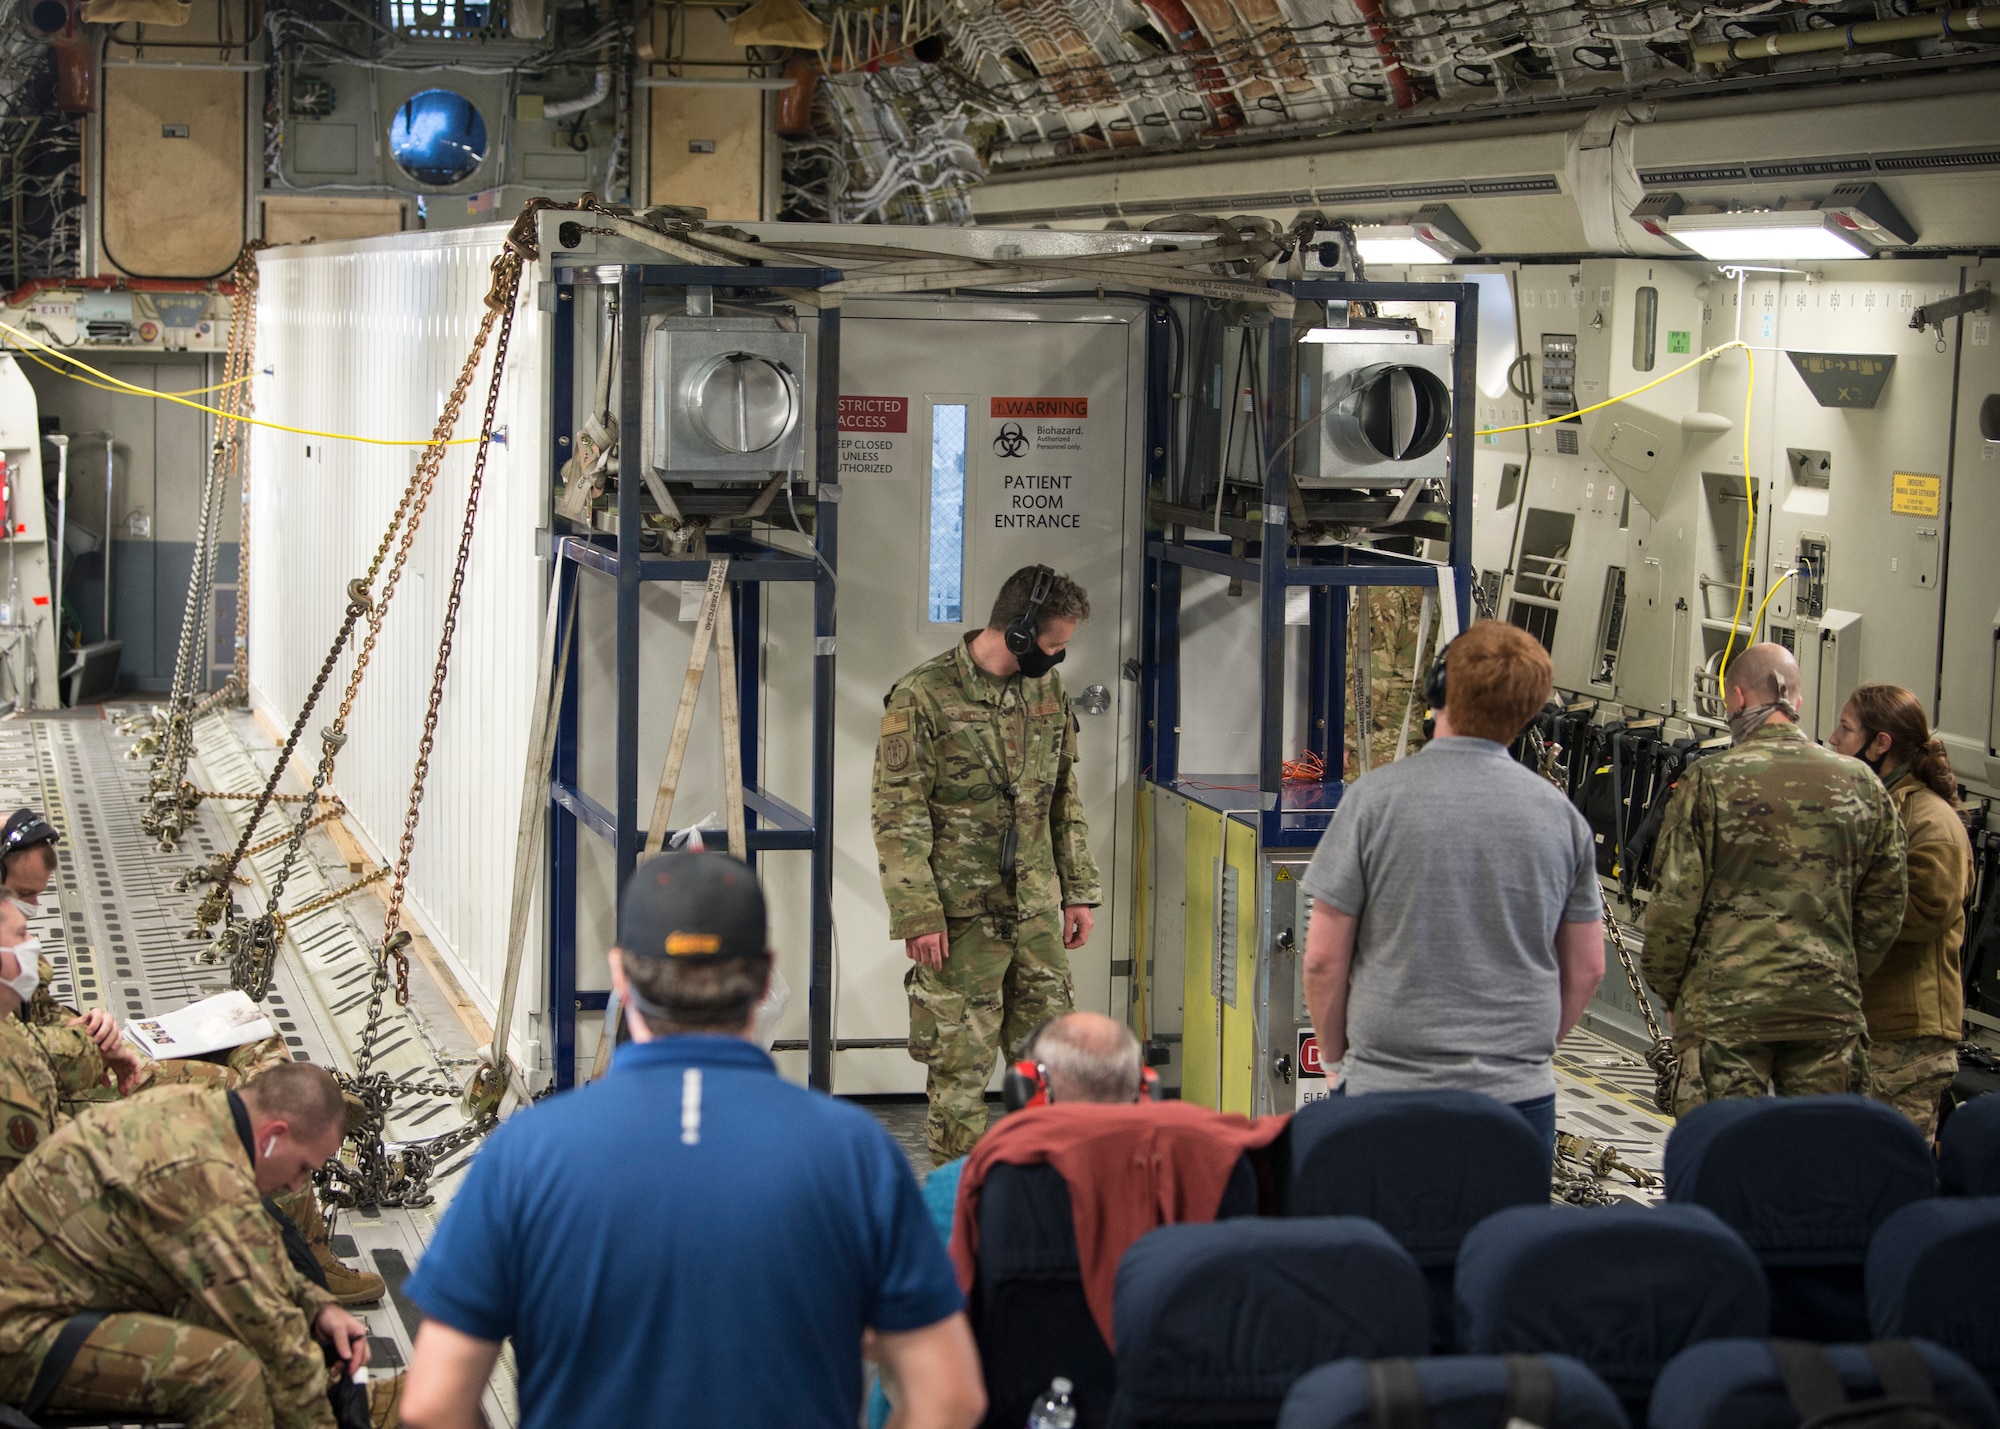 In-flight testing is conducted to certify a Negatively Pressurized Conex prototype on a C-17 Globemaster III, April 30, 2020. The NPC is designed to transport individuals with the COVID-19 virus and other highly infectious diseases, all while preventing the aircrew and medical professionals onboard from being exposed. (U.S. Air Force photo by Staff Sgt. Chris Drzazgowski)